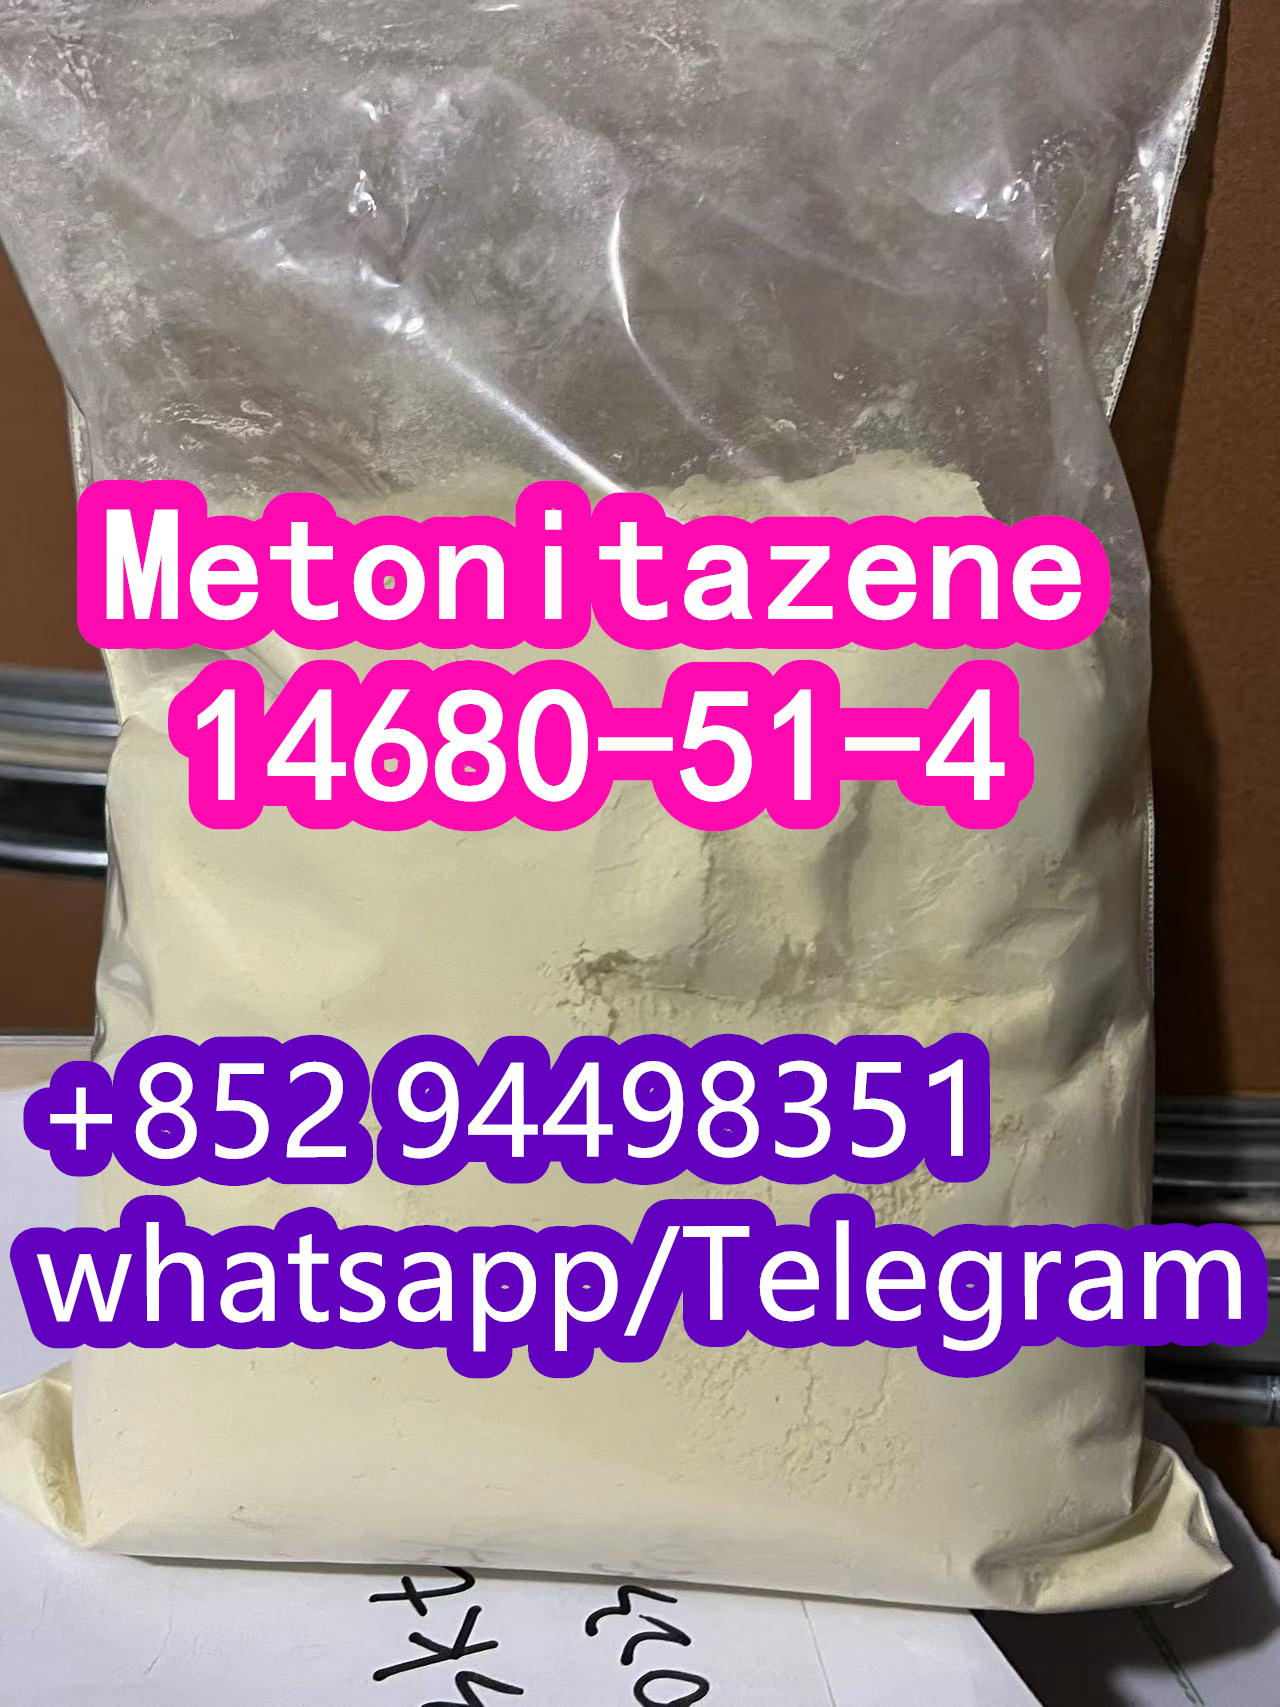 Metonitazene CAS 14680-51-4,nev,Real Estate,For Sale : House & Apartment,77traders